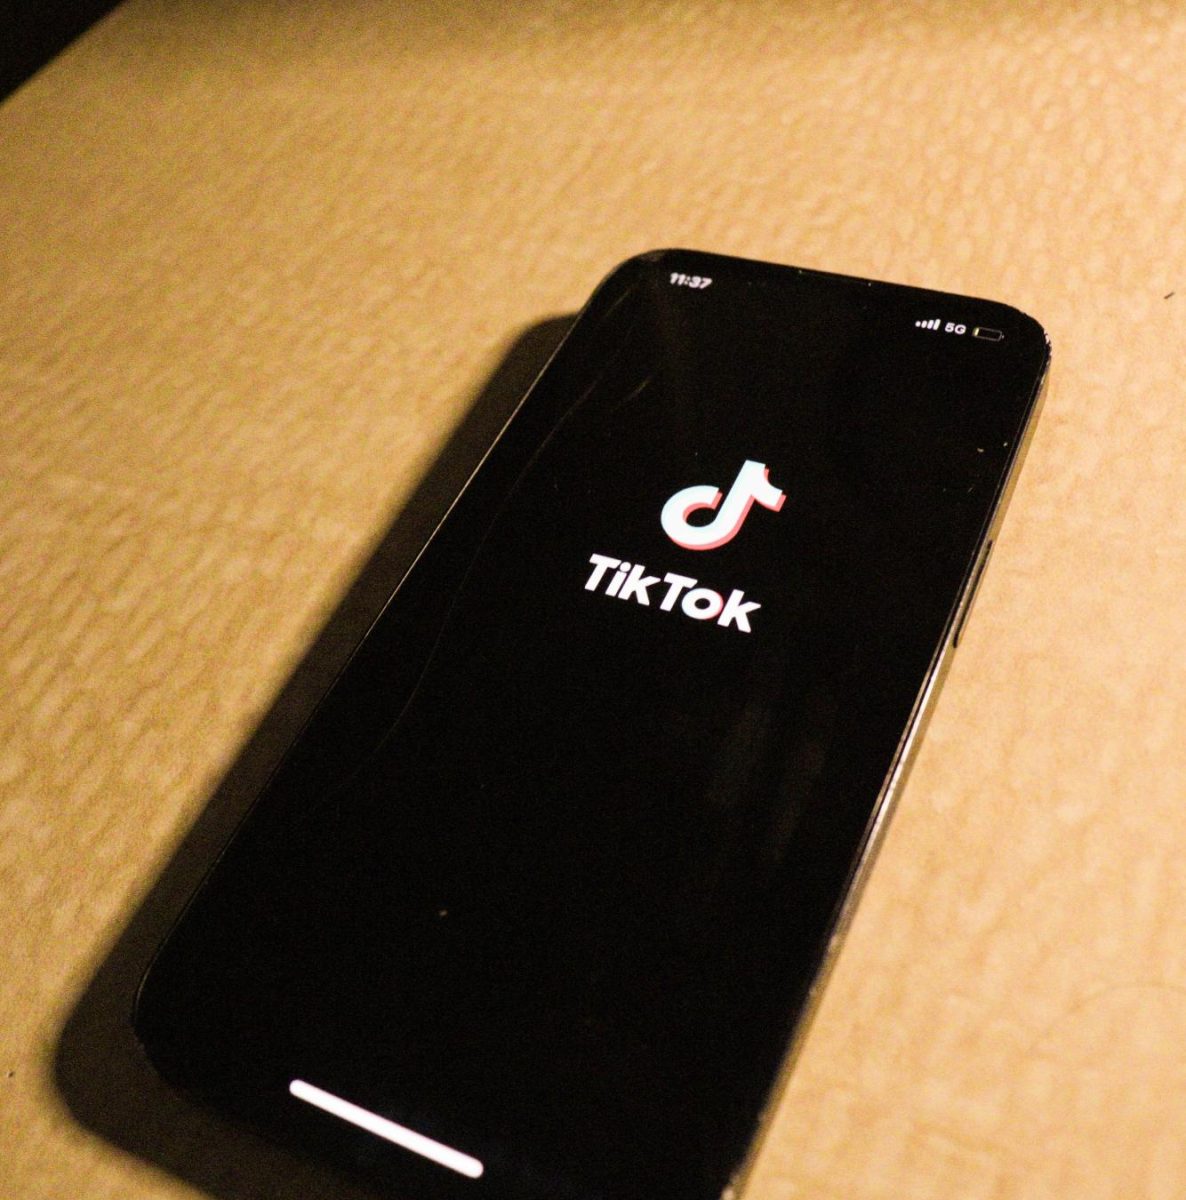 TikTok+loading+on+a+cell+phone